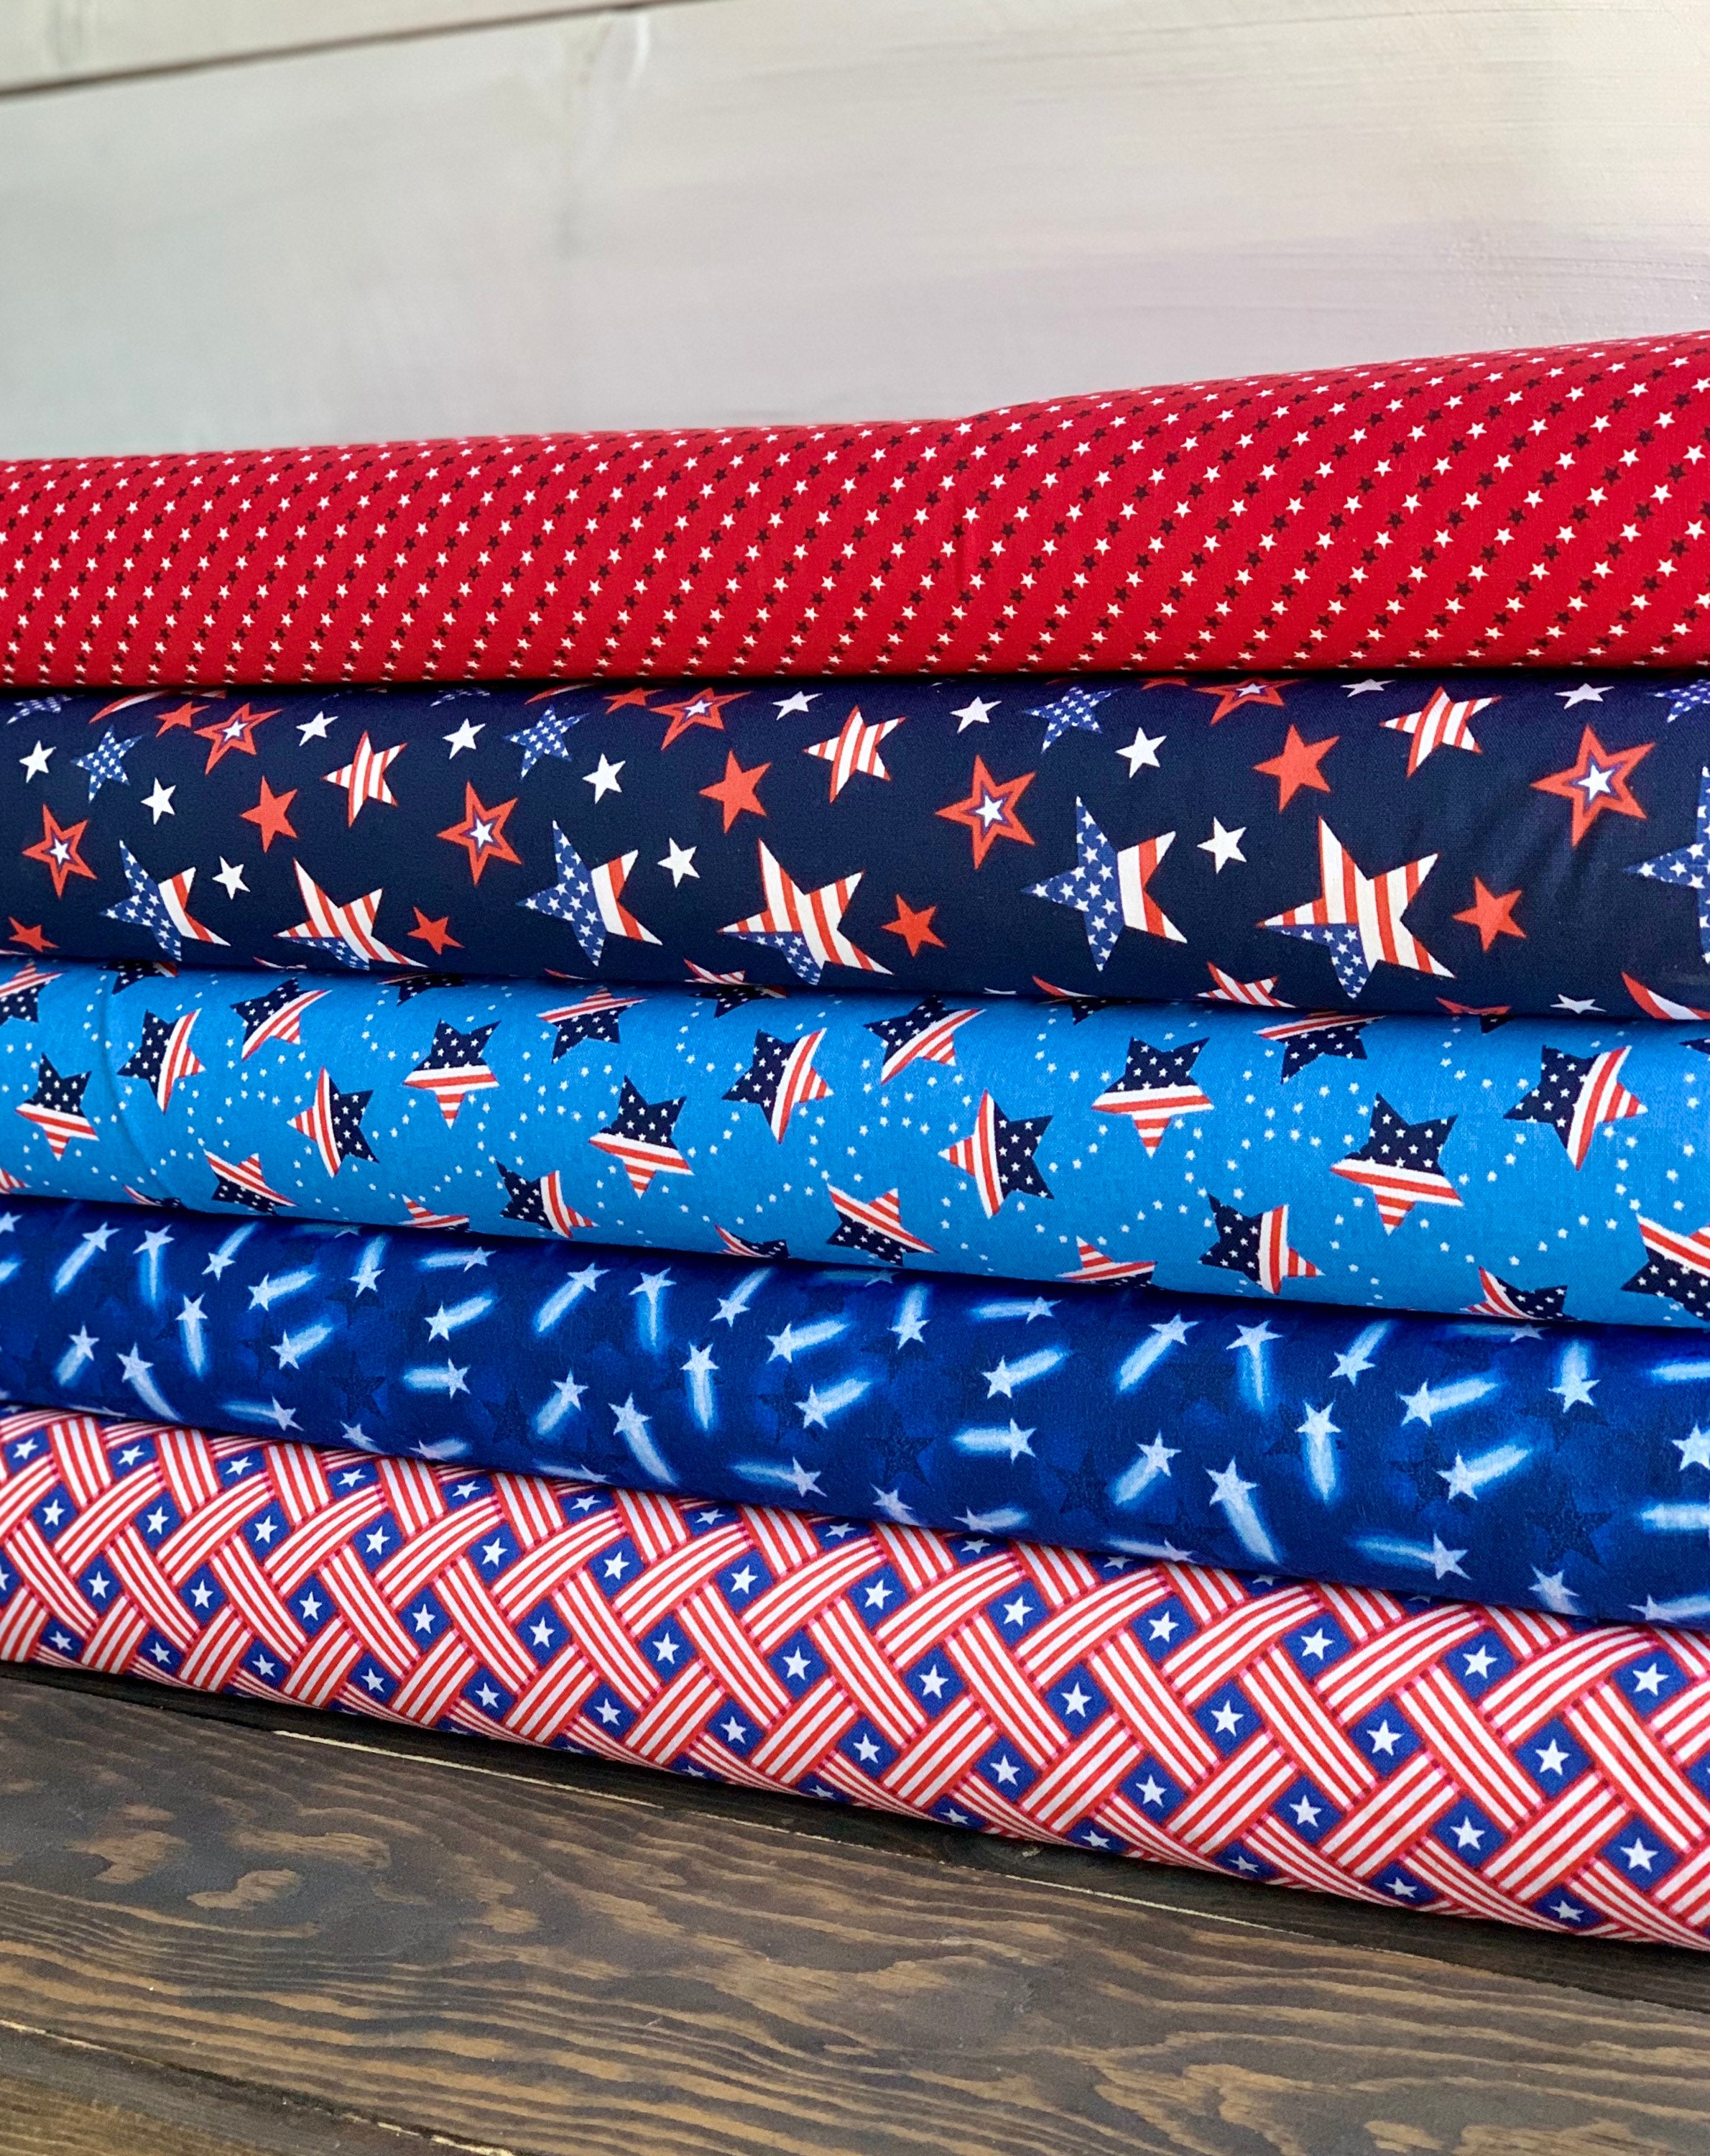 Patriotic Americana 4th of July Fabric Red White and Blue image pic